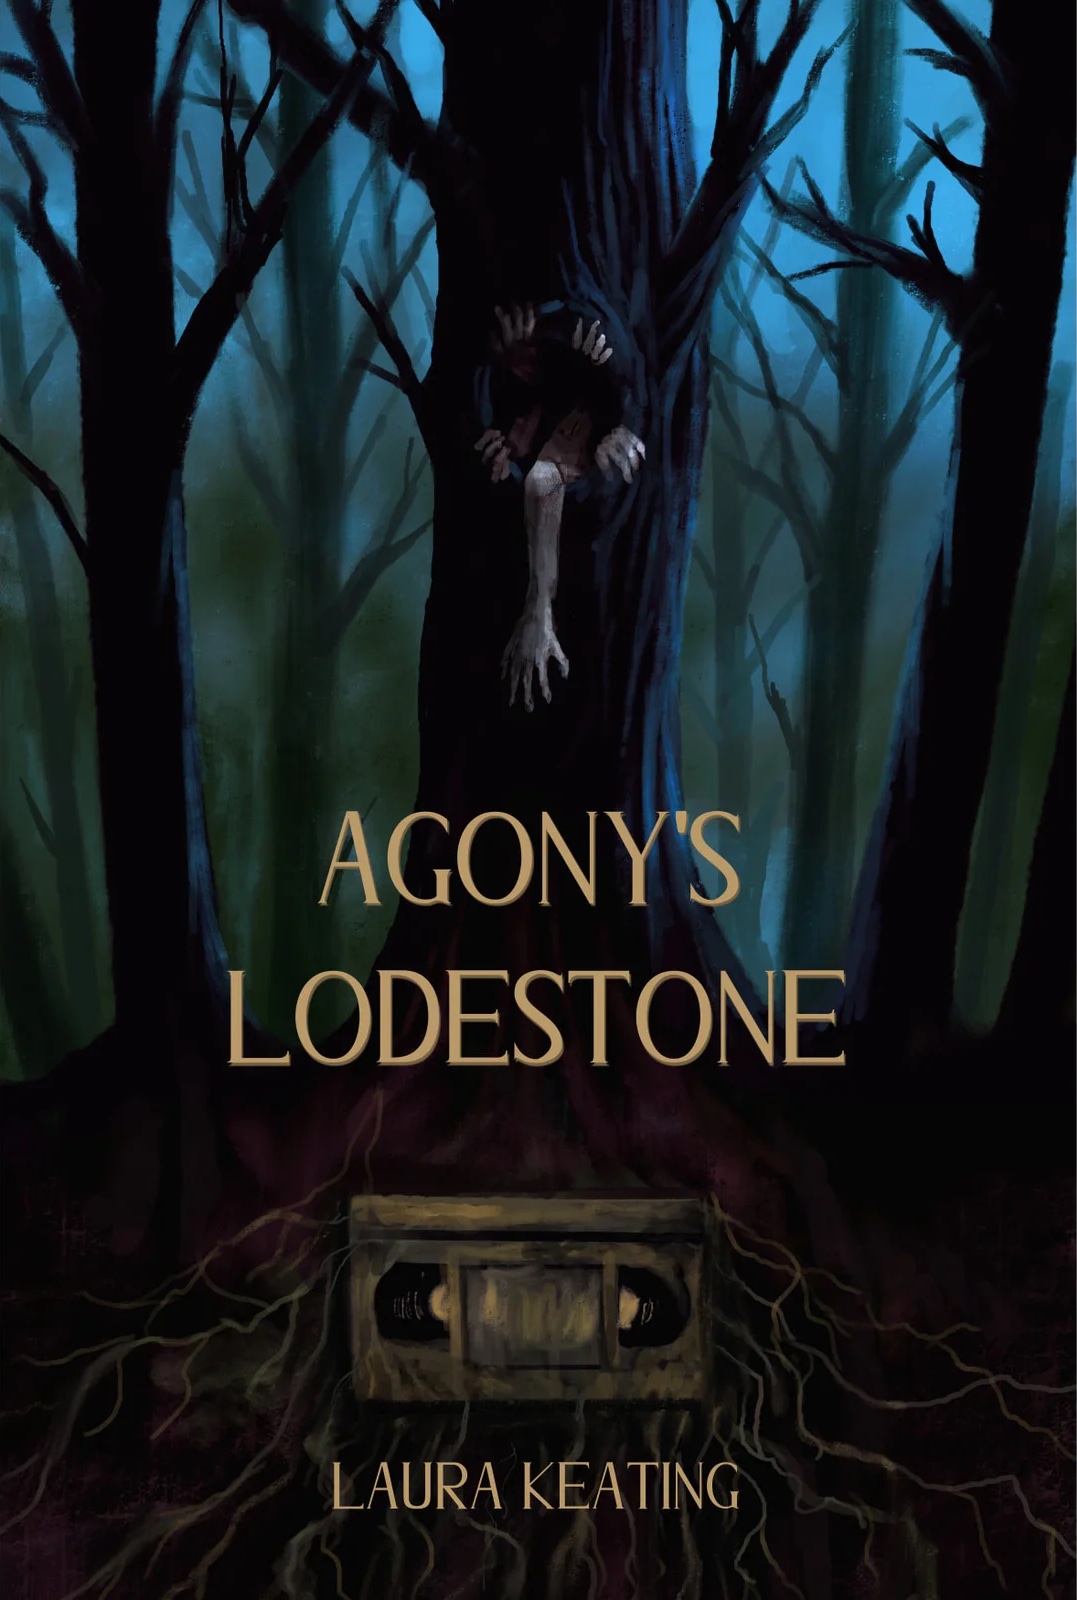 The cover of Agony's Lodestone by Laura Keating